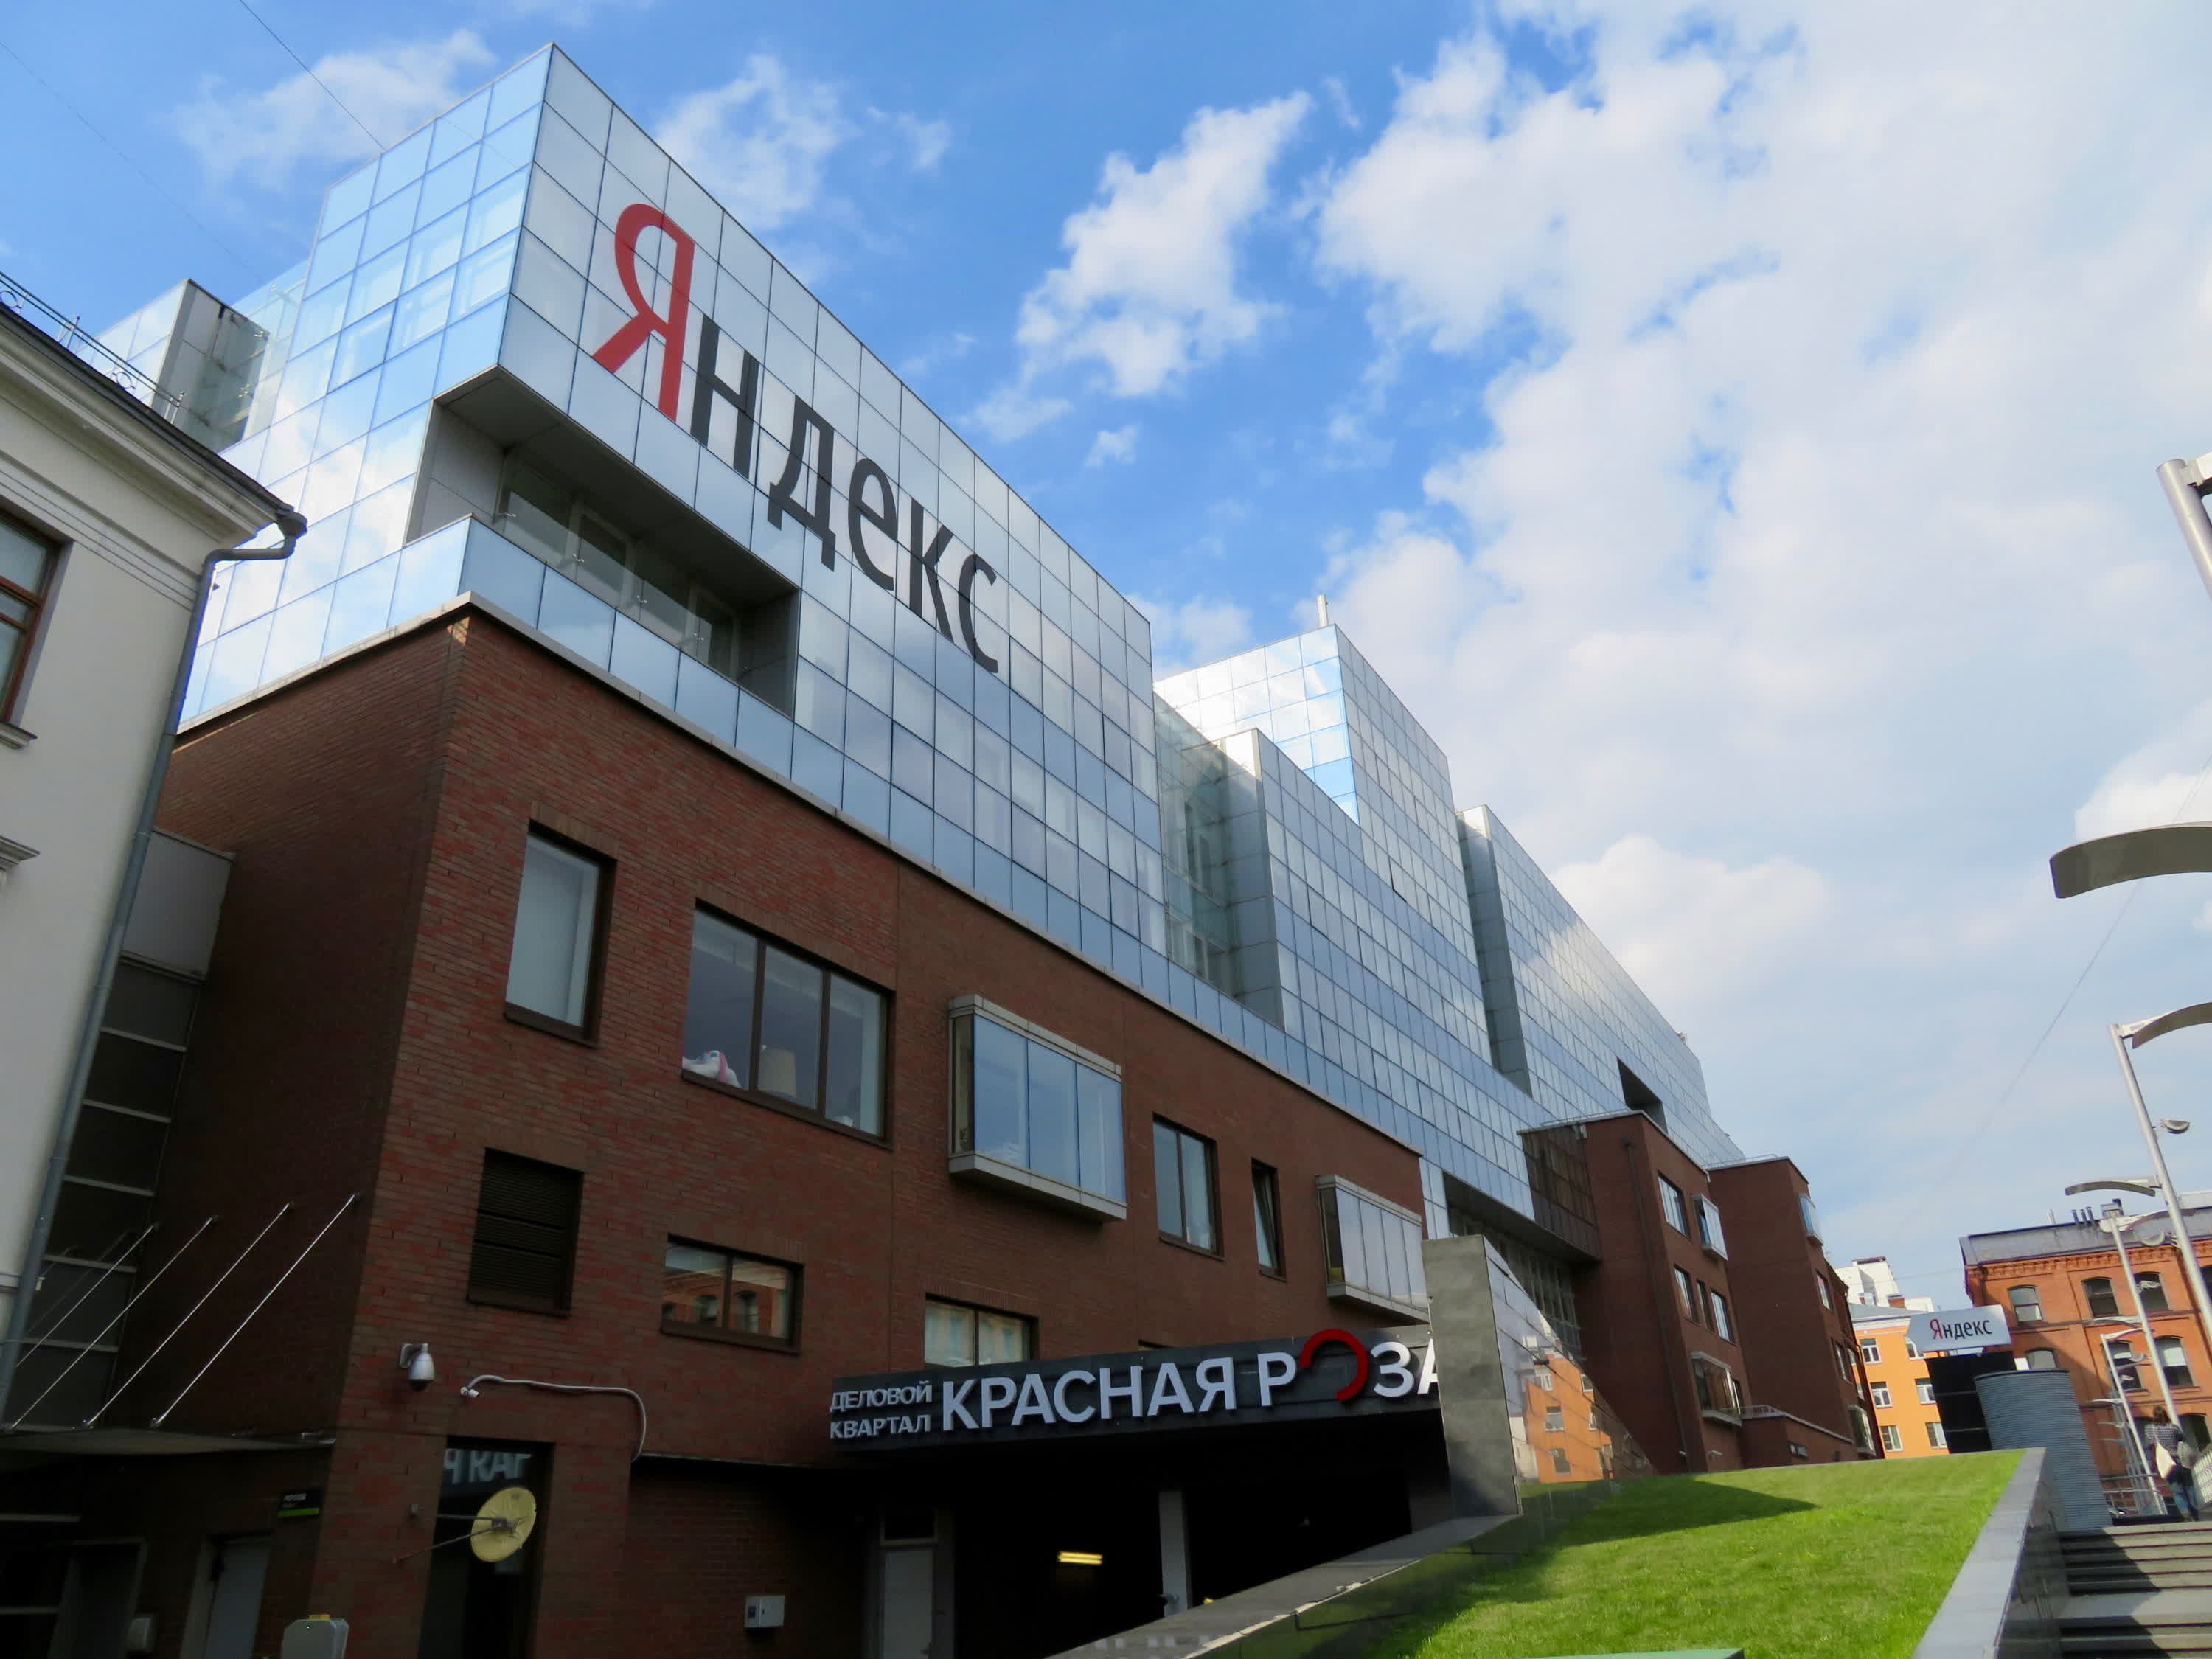 Yandex leak includes source code for popular Russian search engine